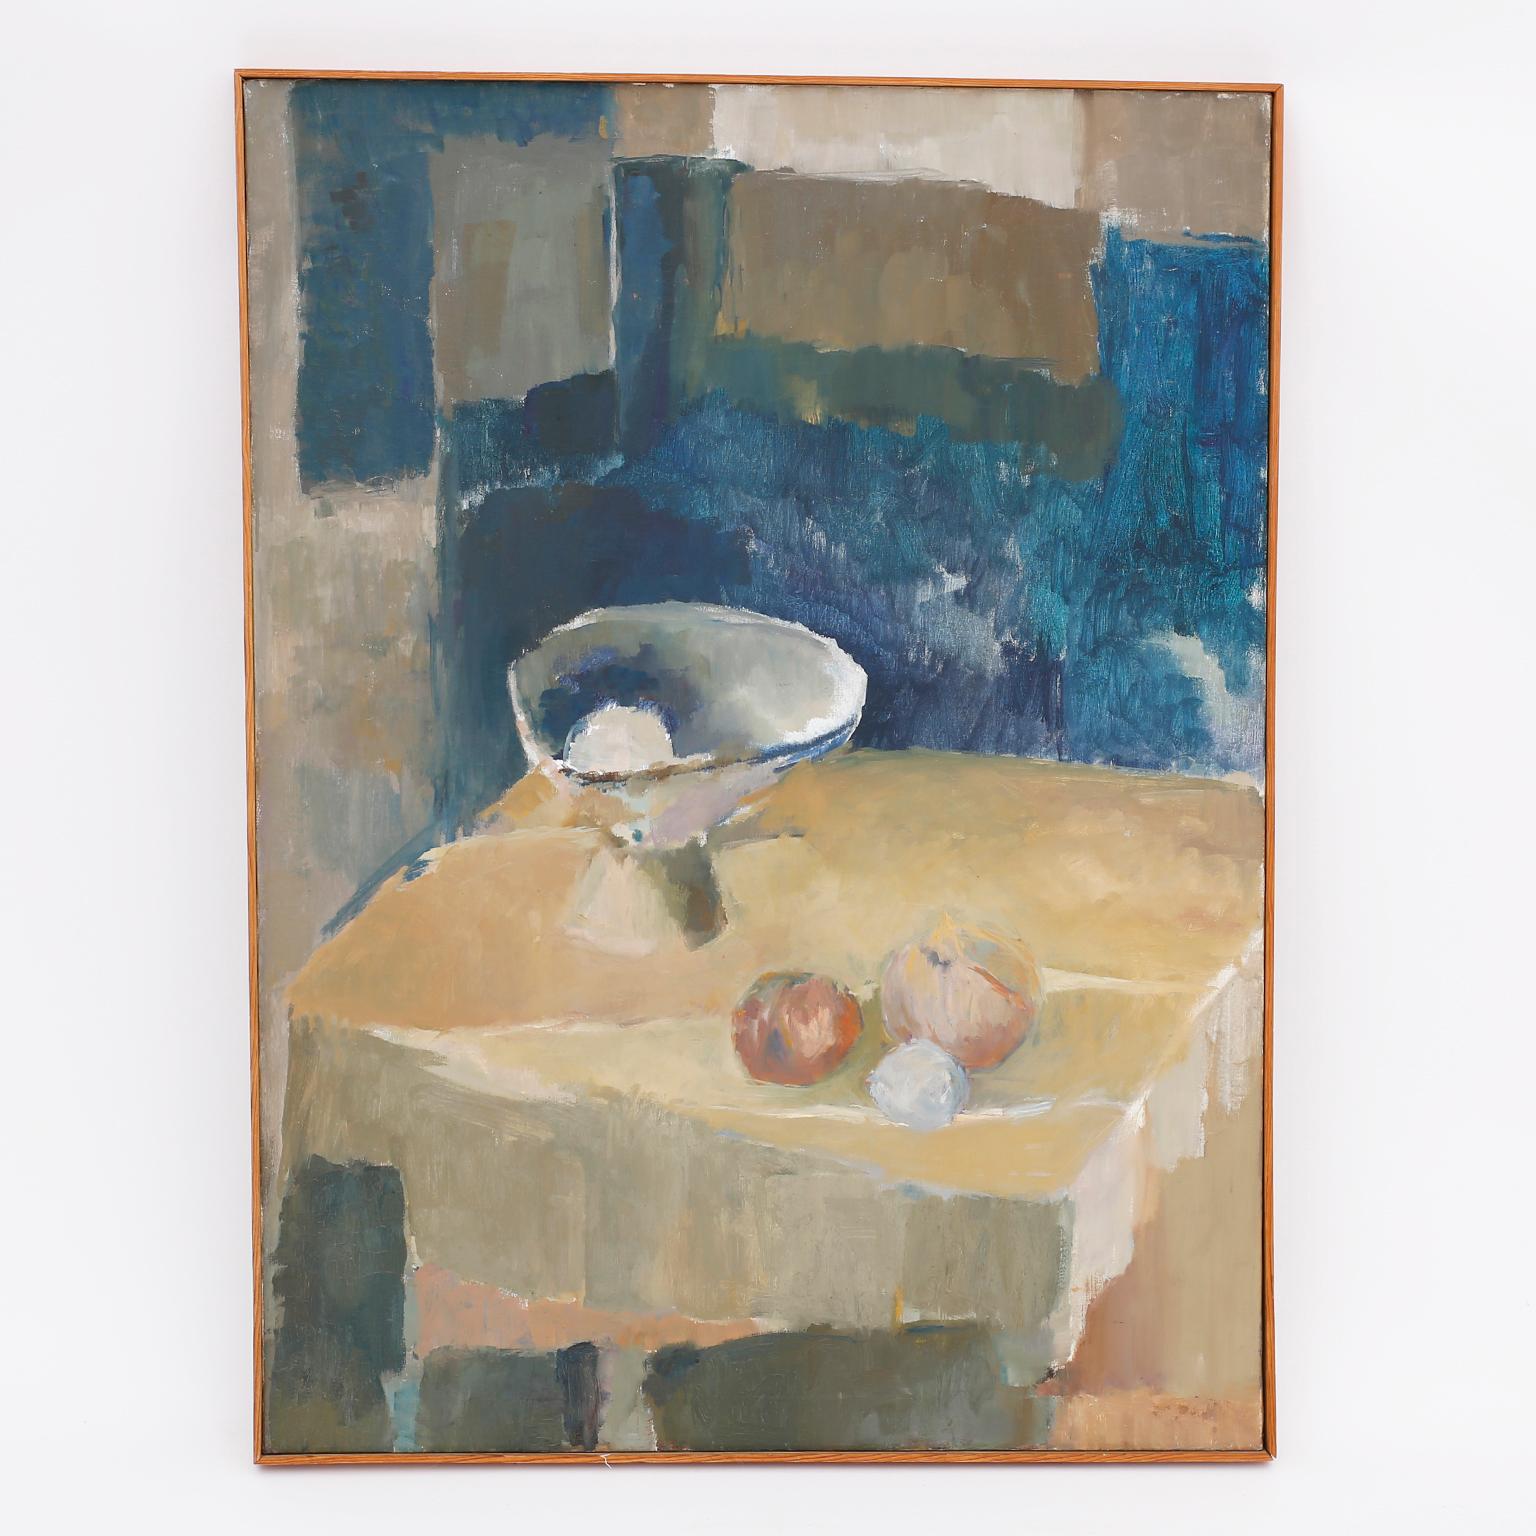 Inviting abstract expressionist still life on canvas. Classic composition redefined with subjective interpretation of color and light that has a relaxing effect. Presented in its original frame, signed and dated on the back May March 7/61.